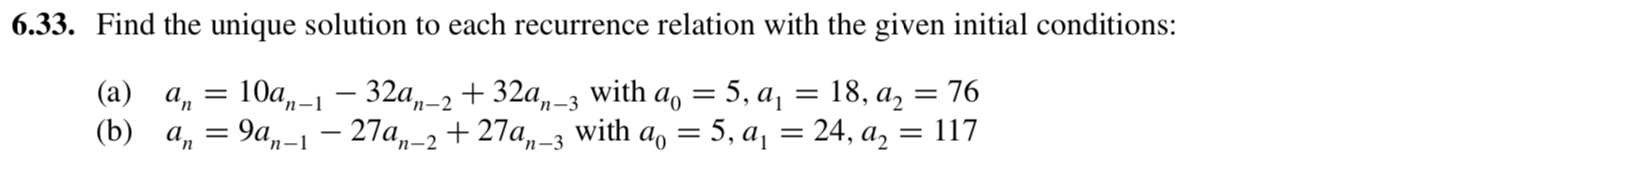 Find the unique solution to each recurrence relation with the given initial conditions:
